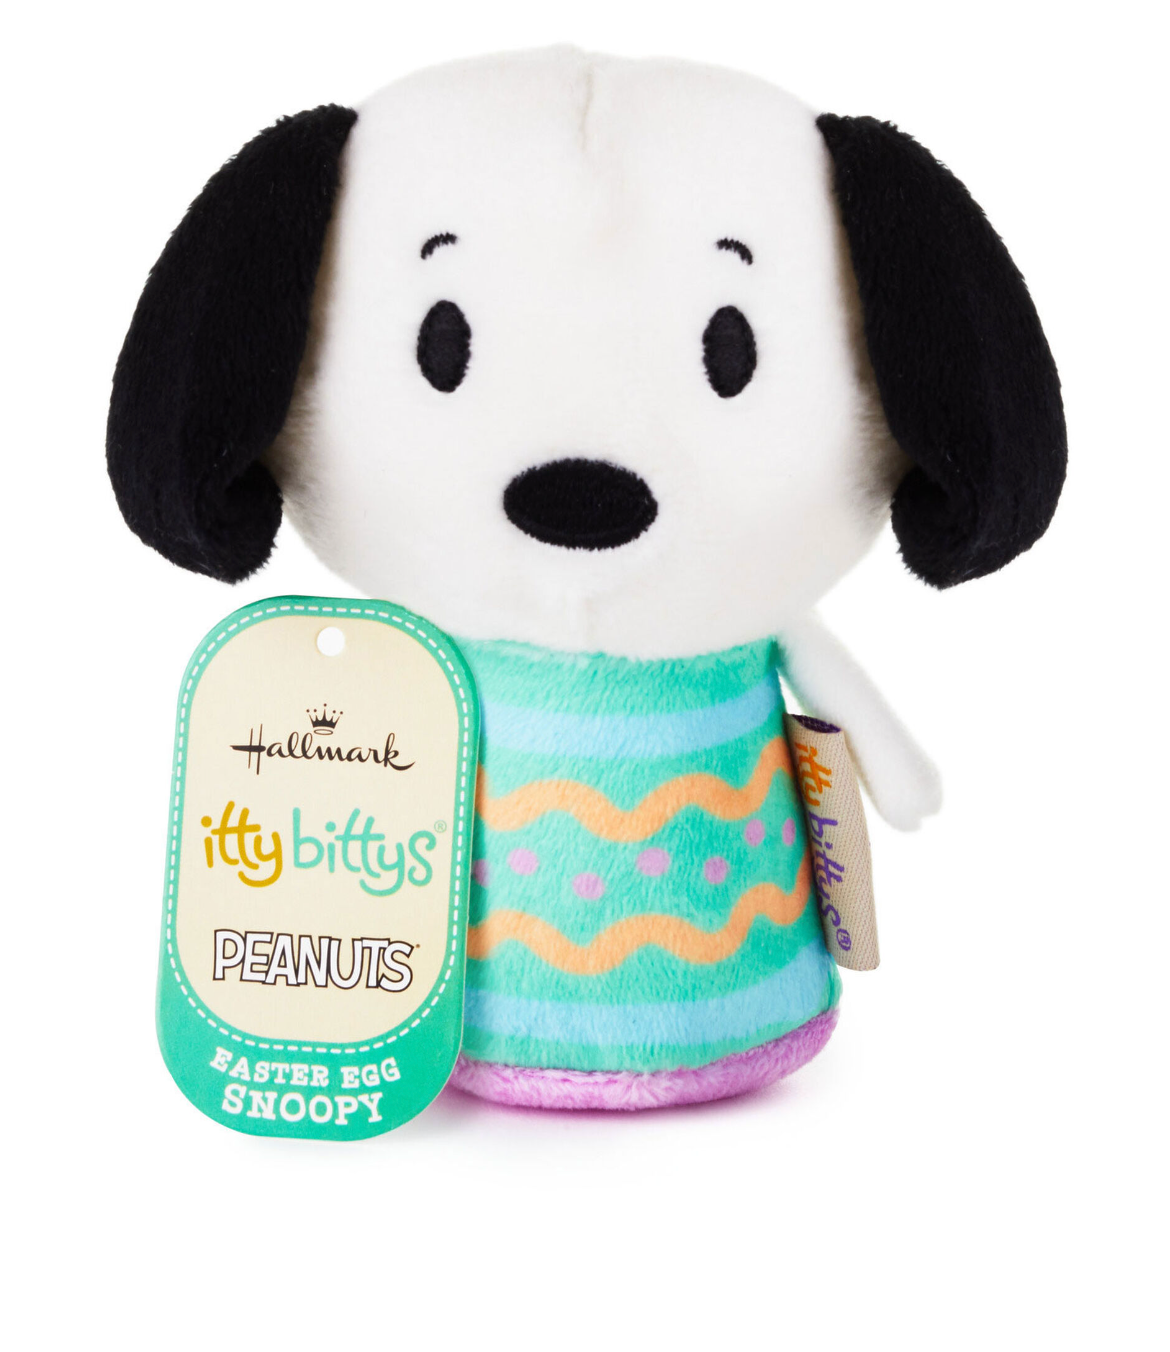 Hallmark Itty Bittys Peanuts Easter Egg Snoopy Plush New with Tag